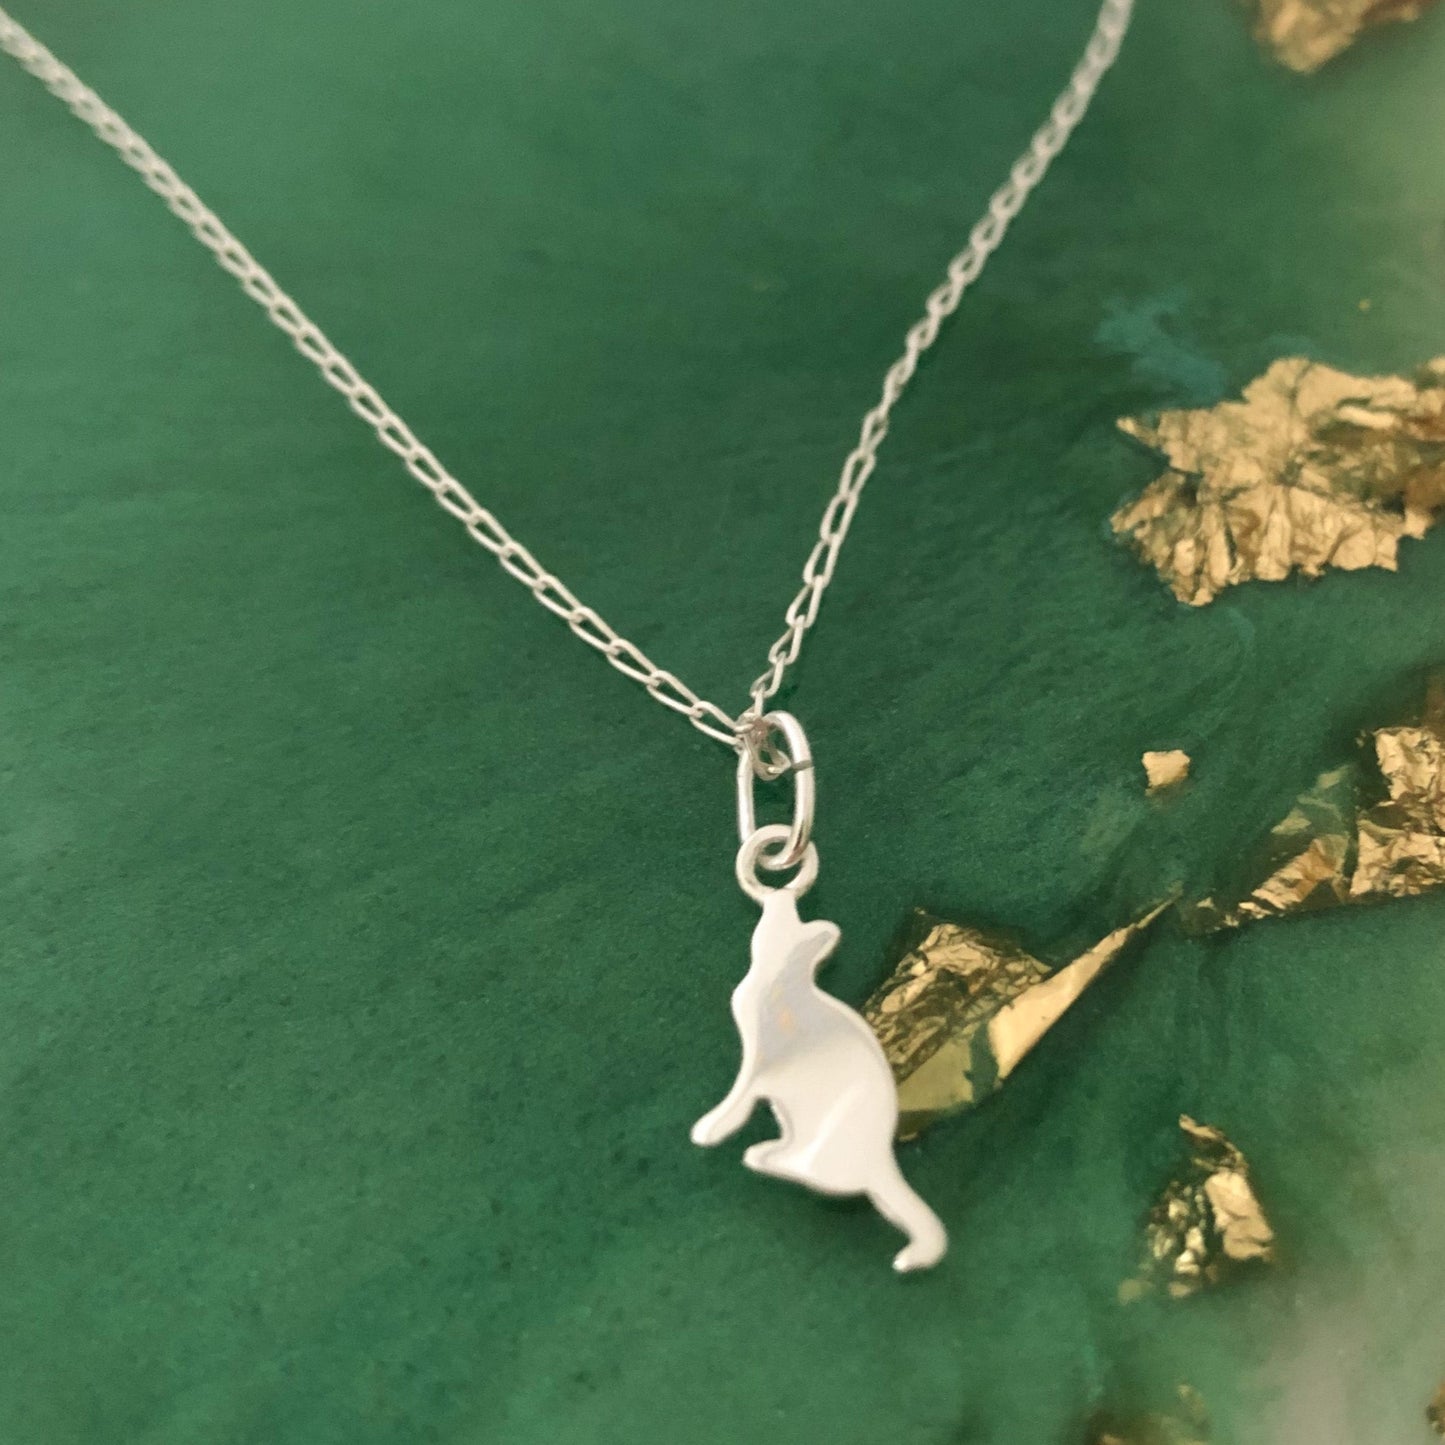 Silver Cat Charm Necklace